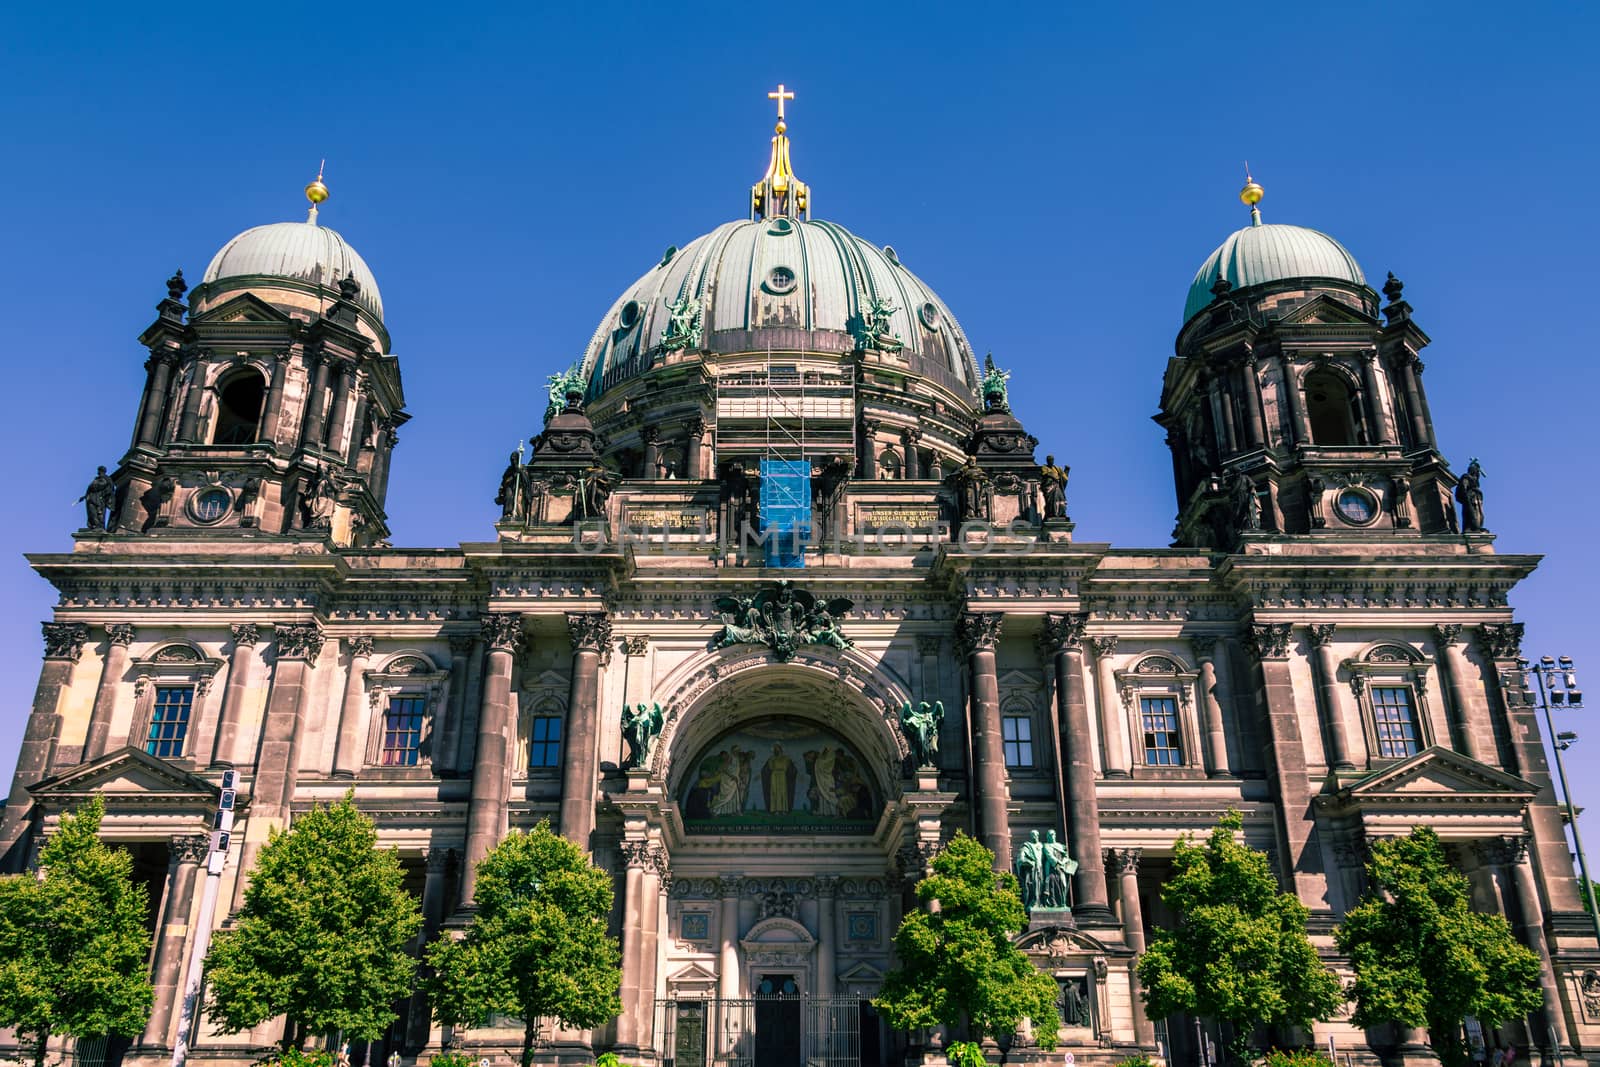 Exterior view of Berliner Dom, also known as Berlin Cathedral by Anelik